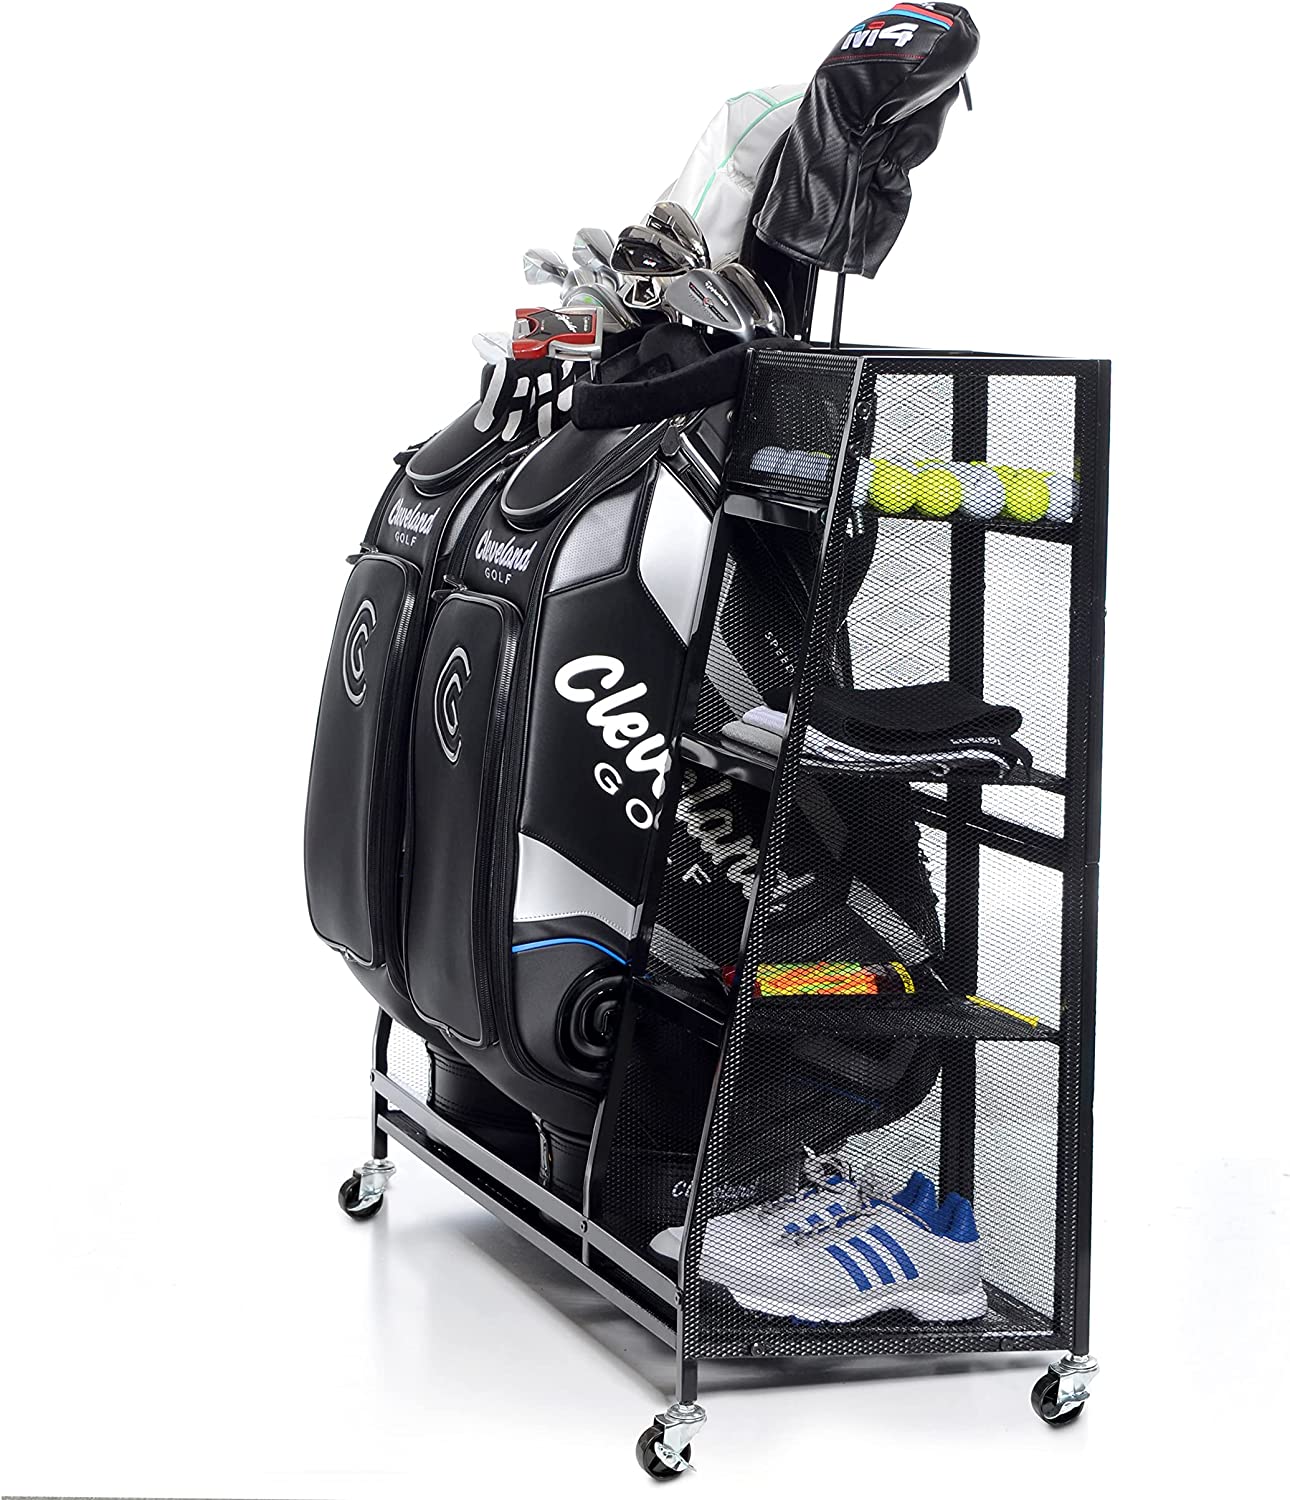 Take your golf game to the next level with this handy golf storage